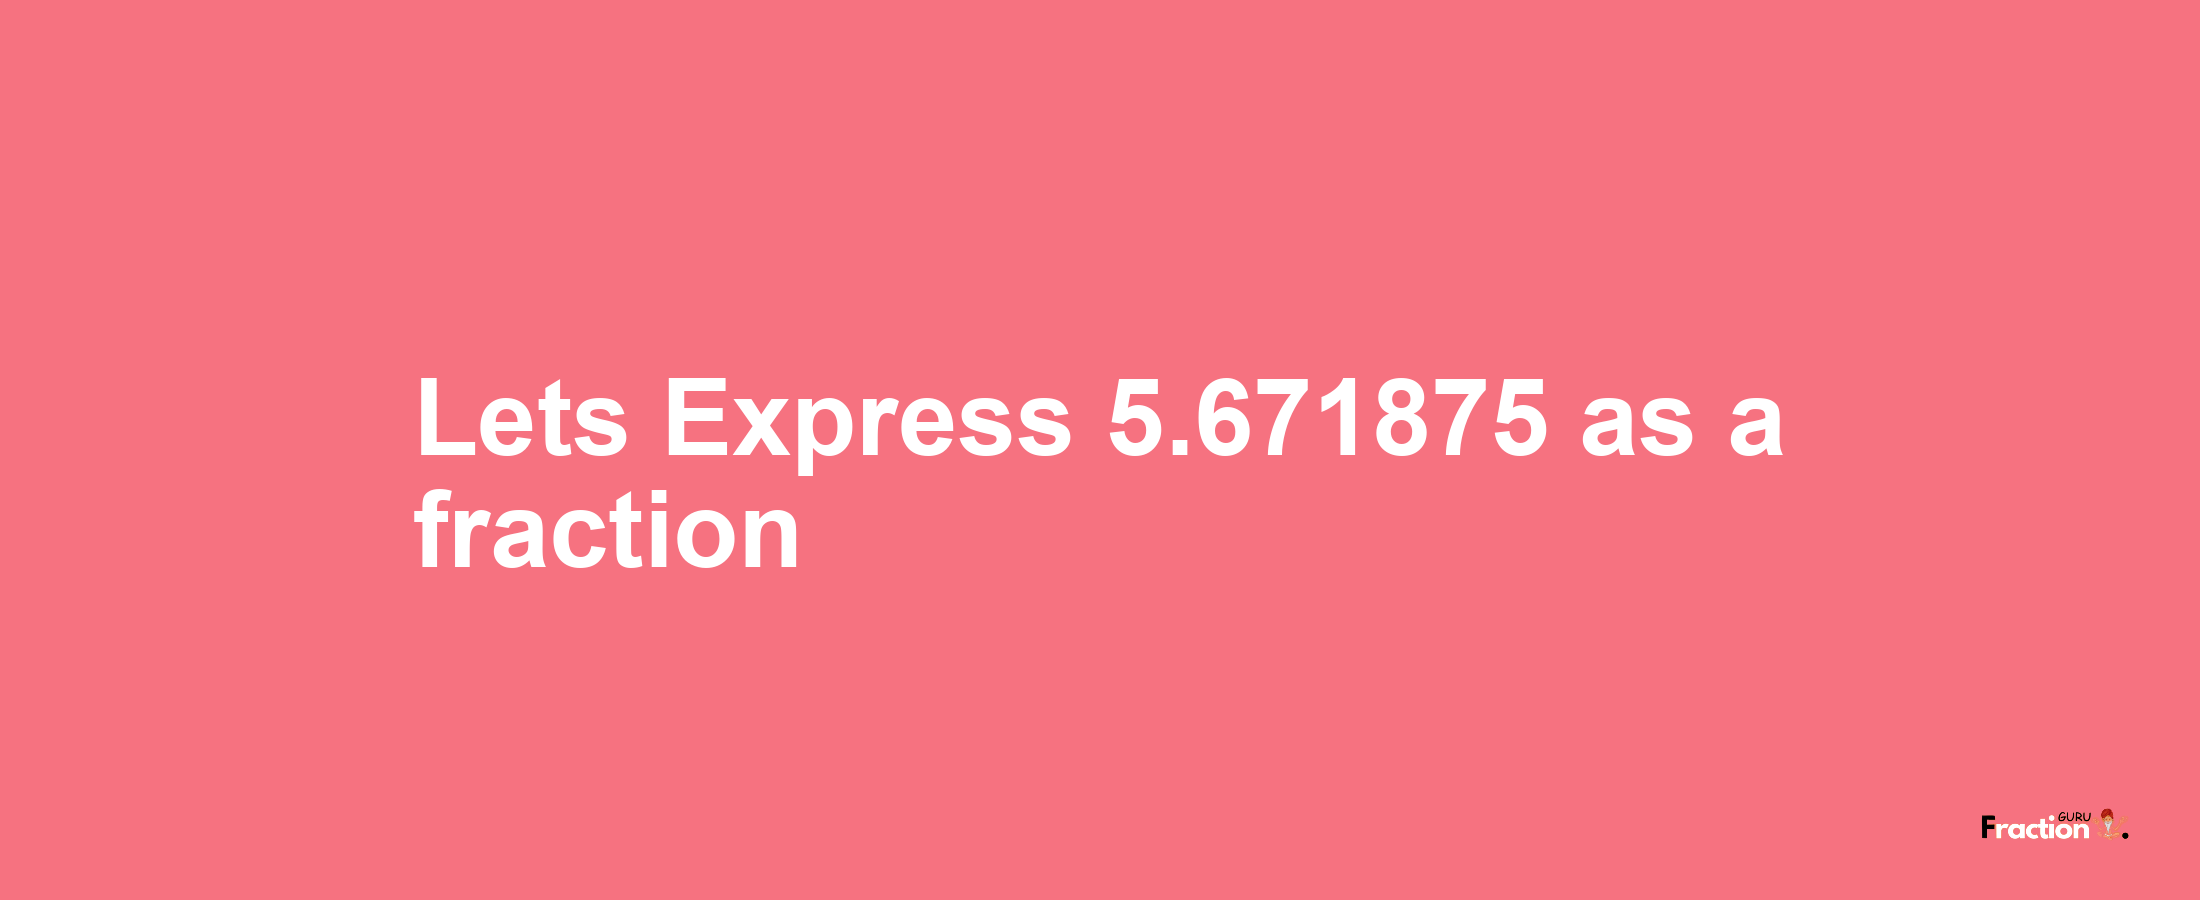 Lets Express 5.671875 as afraction